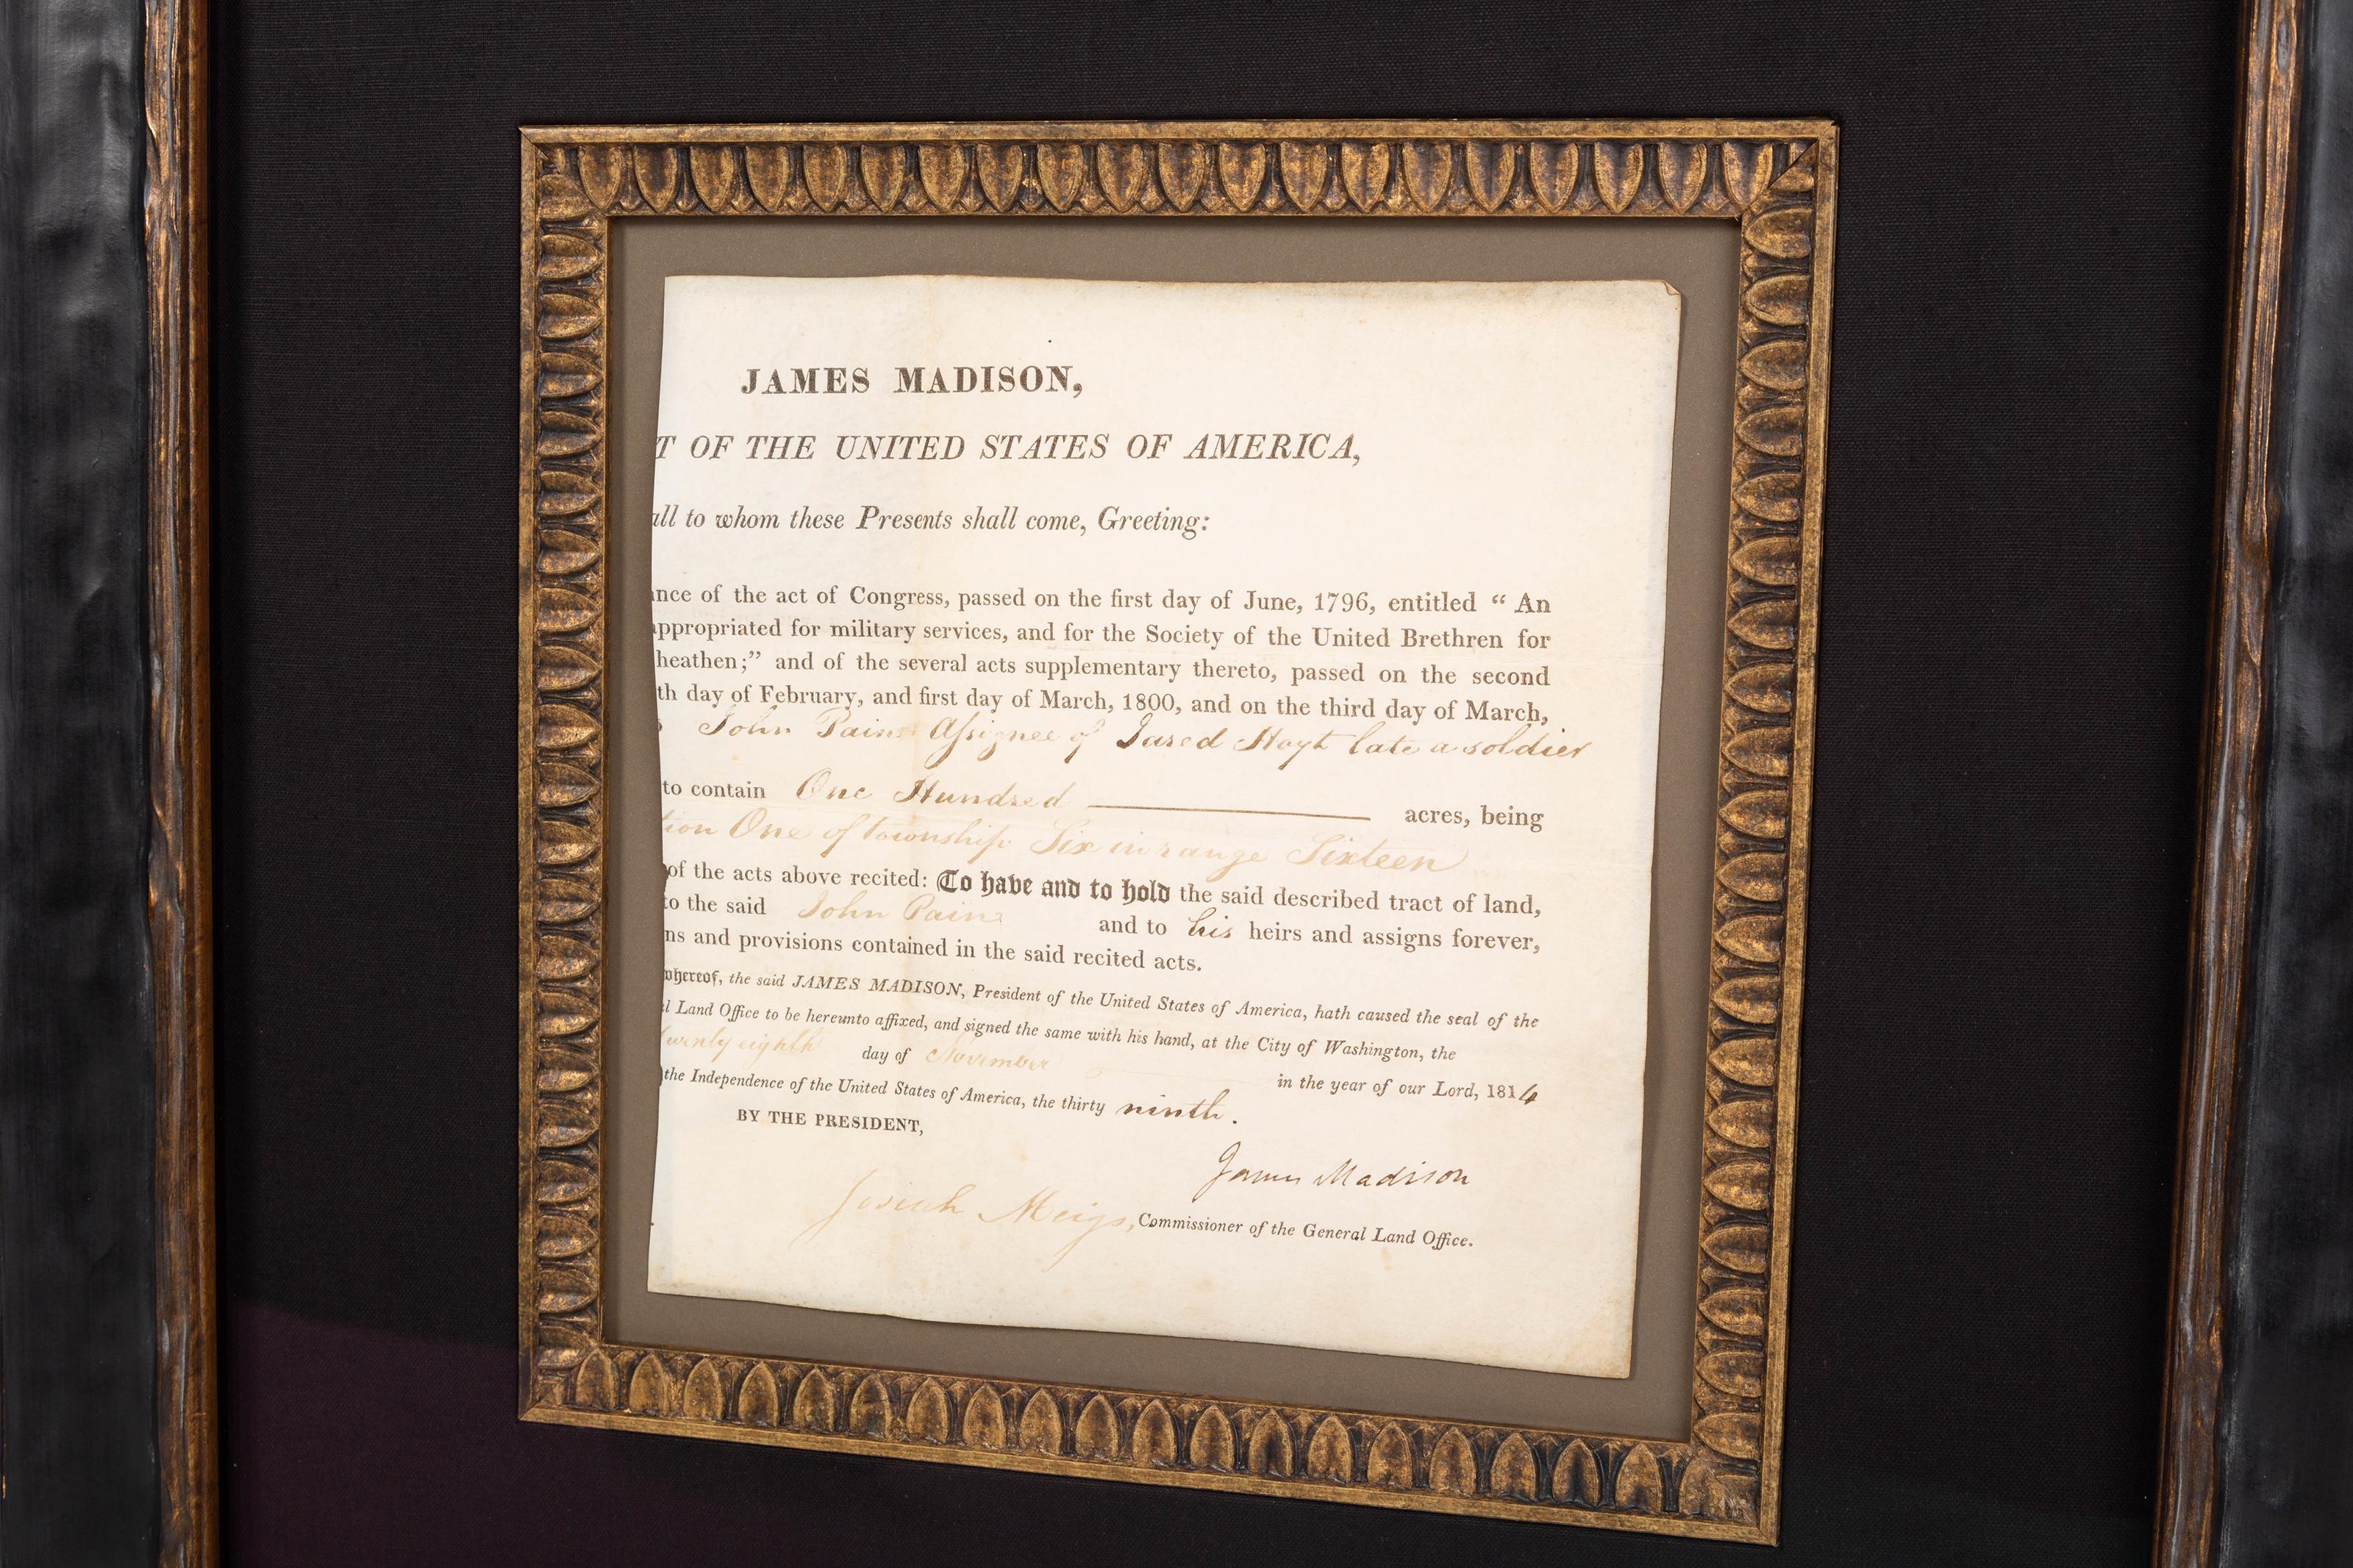 Presented is a custom collage featuring an original signature from James Madison. This collage includes the signed document on vellum, which grants 100 acres of land to John Pain, dated November 28, 1814. James Madison's signature is penned in ink